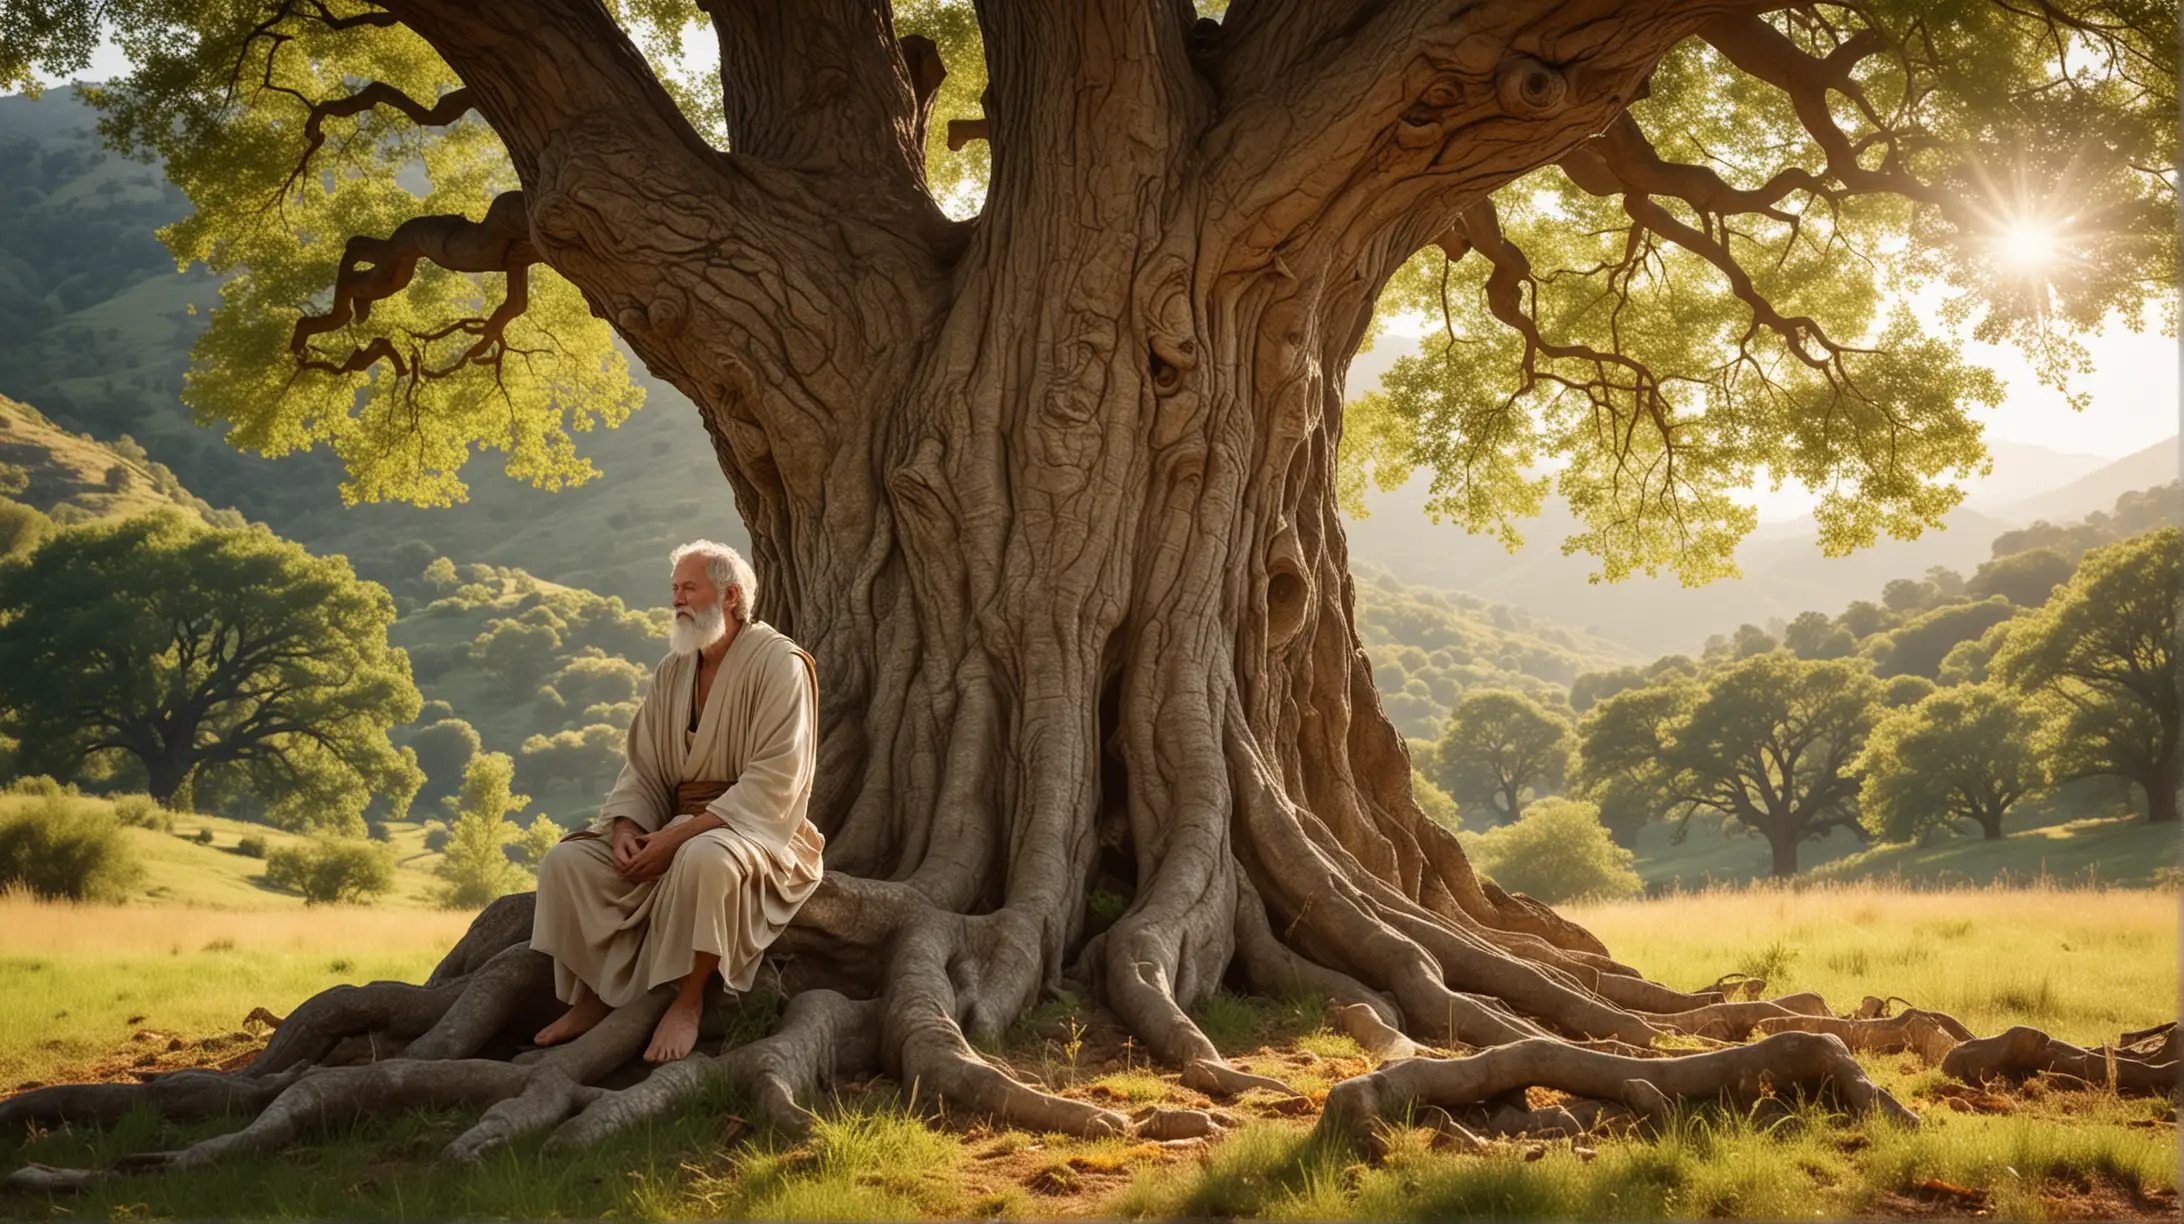 Visualize a stoic philosopher meditating under a towering oak tree, surrounded by serene nature. Illustrate his focused expression as he finds inner peace and clarity. Image Description: The image depicts a stoic philosopher seated in a cross-legged position at the base of a majestic oak tree. His eyes are closed in deep meditation, and his posture exudes tranquility and strength. The dappled sunlight filters through the leaves, casting a warm glow on his chiseled features. In the background, a serene landscape of rolling hills and distant mountains stretches out, evoking a sense of vastness and tranquility.